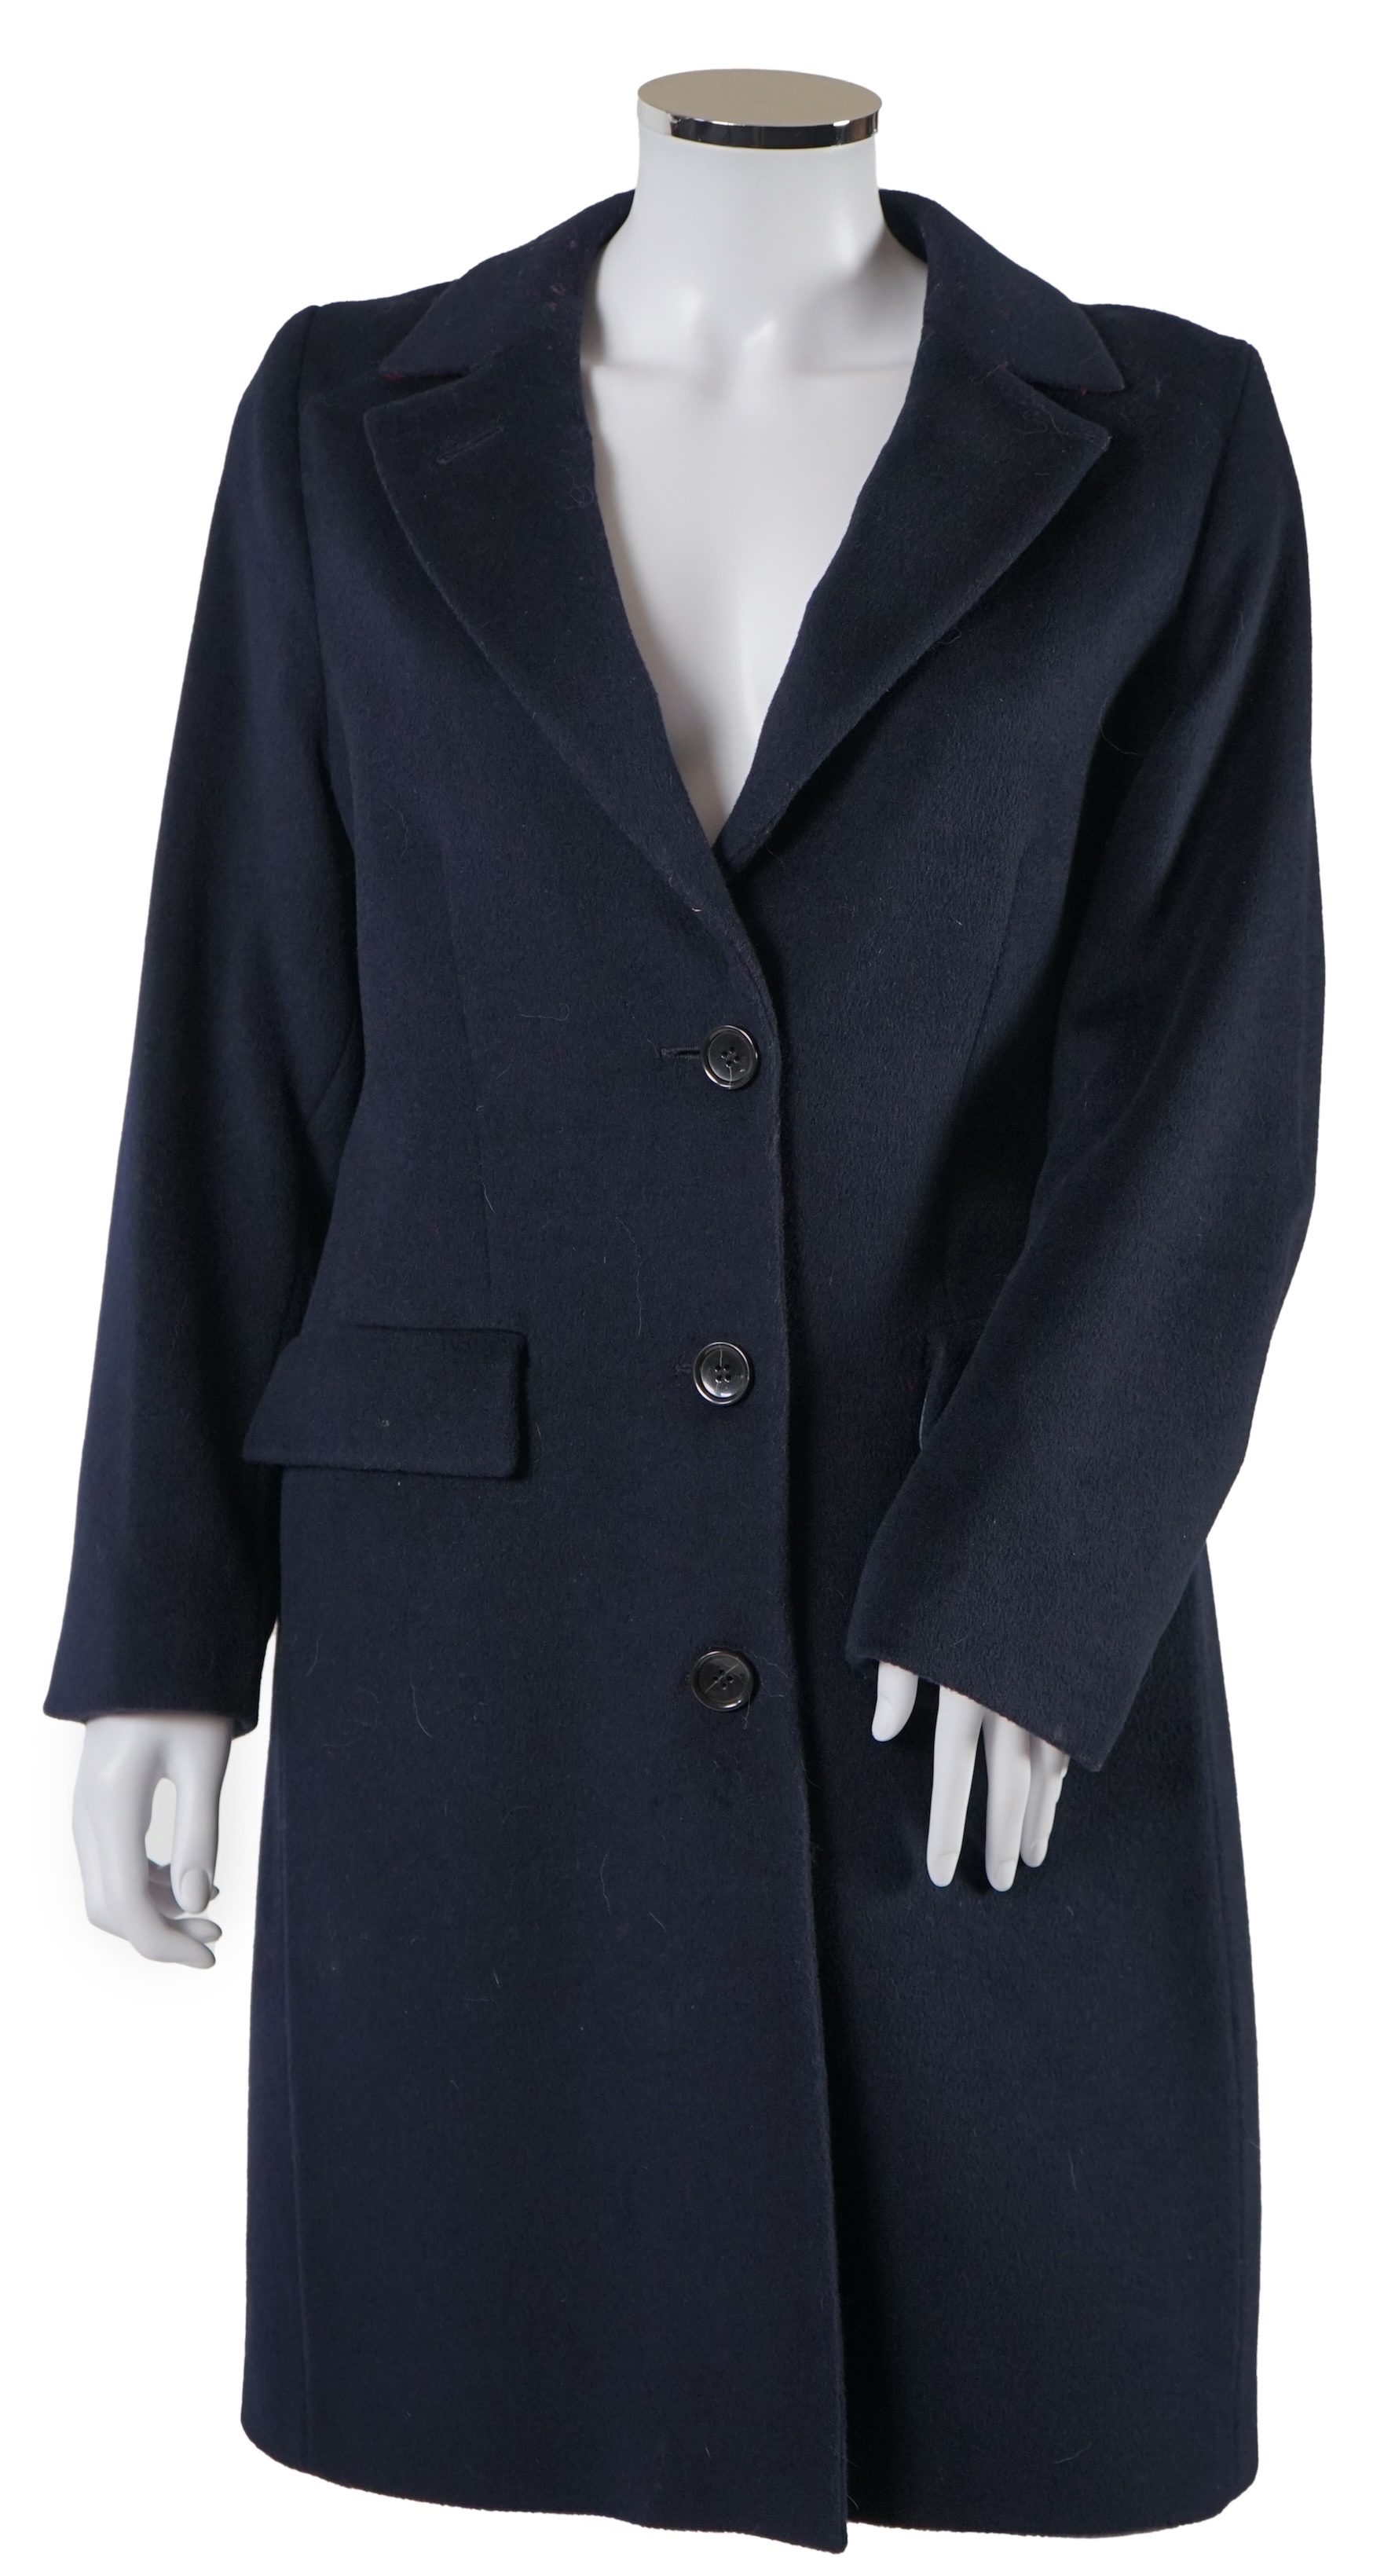 Five unisex and lady's coats including Tommy Hilfiger, Large - X Large. Proceeds to Happy Paws Puppy Rescue